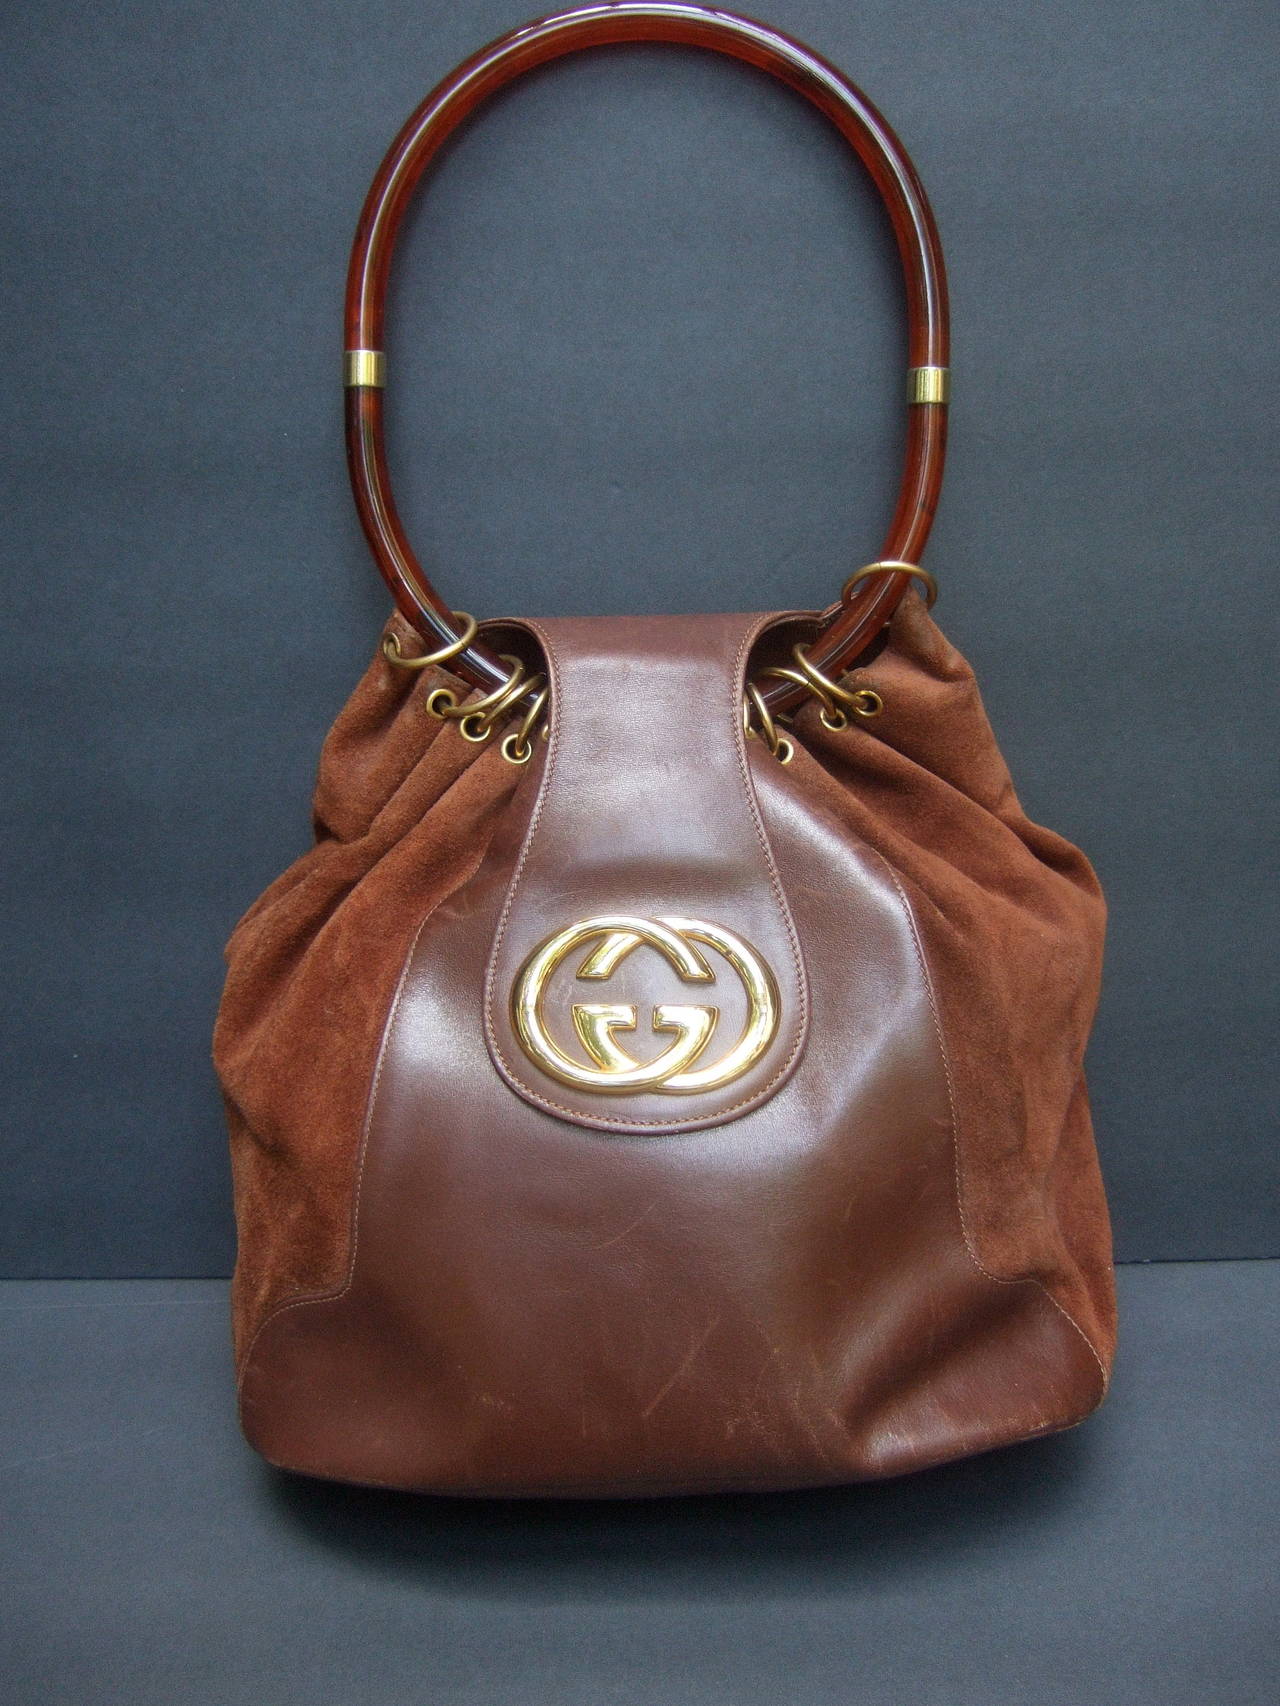 Gucci Italy Rare Brown Leather and Suede Handbag c 1970 at 1stdibs